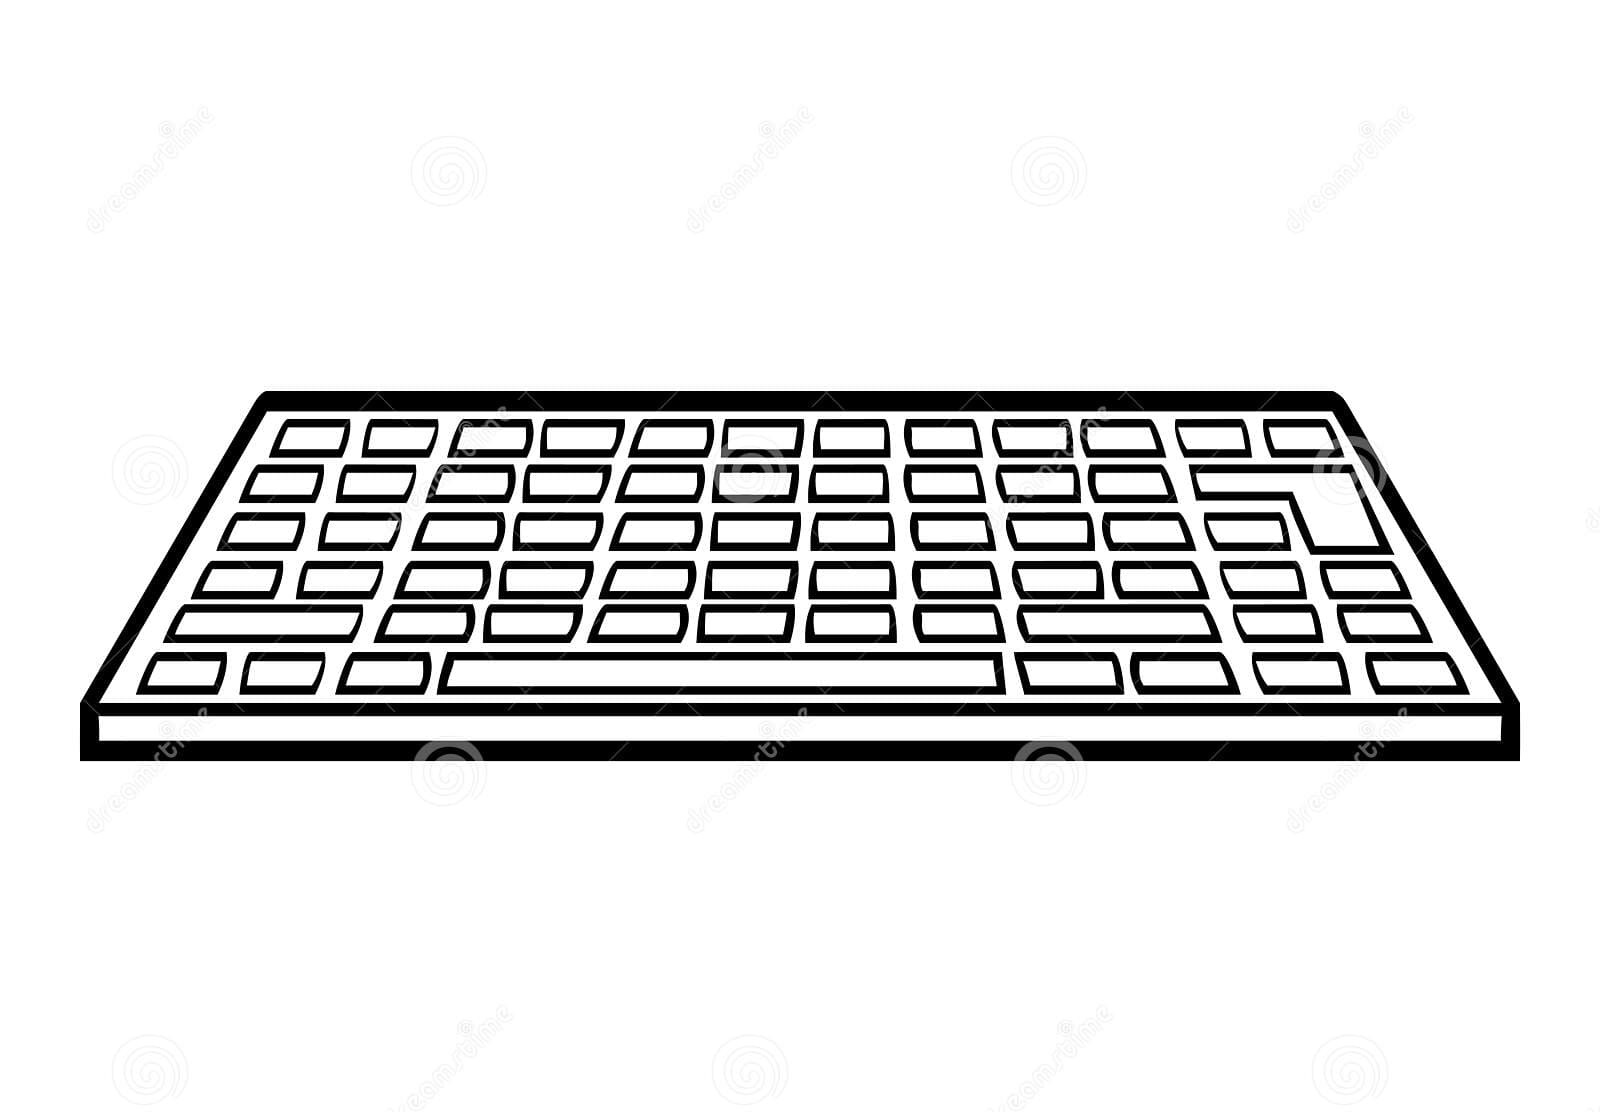 Coloring book, Computer keyboard Coloring Page